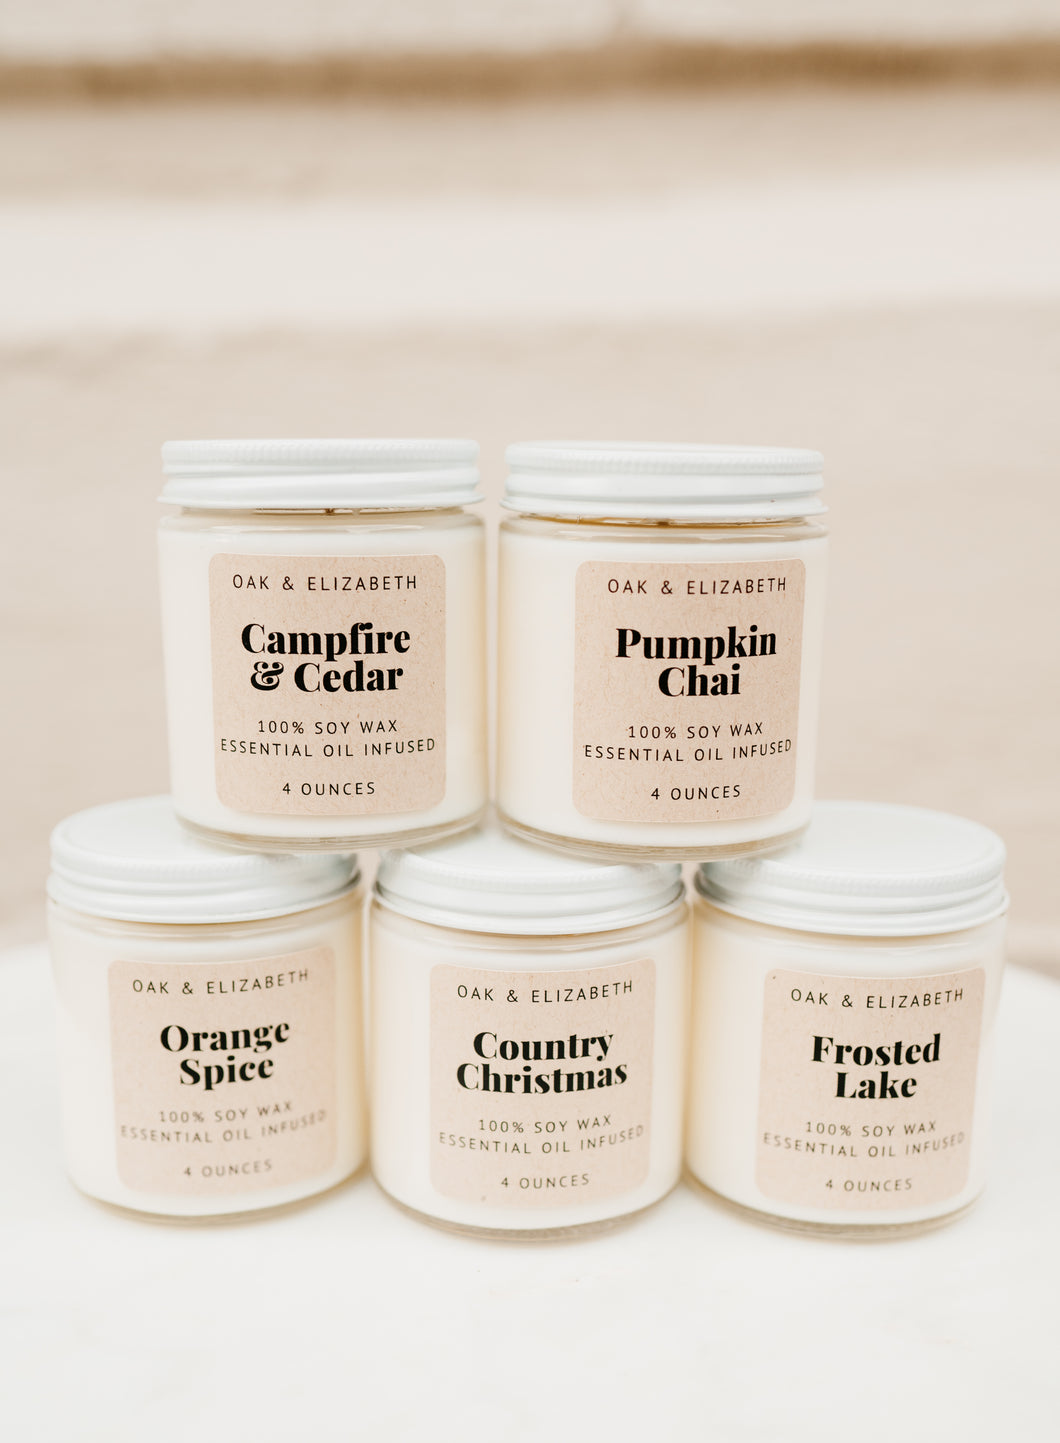 $11 each or $10 each when you purchase 3+ Soy Wax Candle 4oz